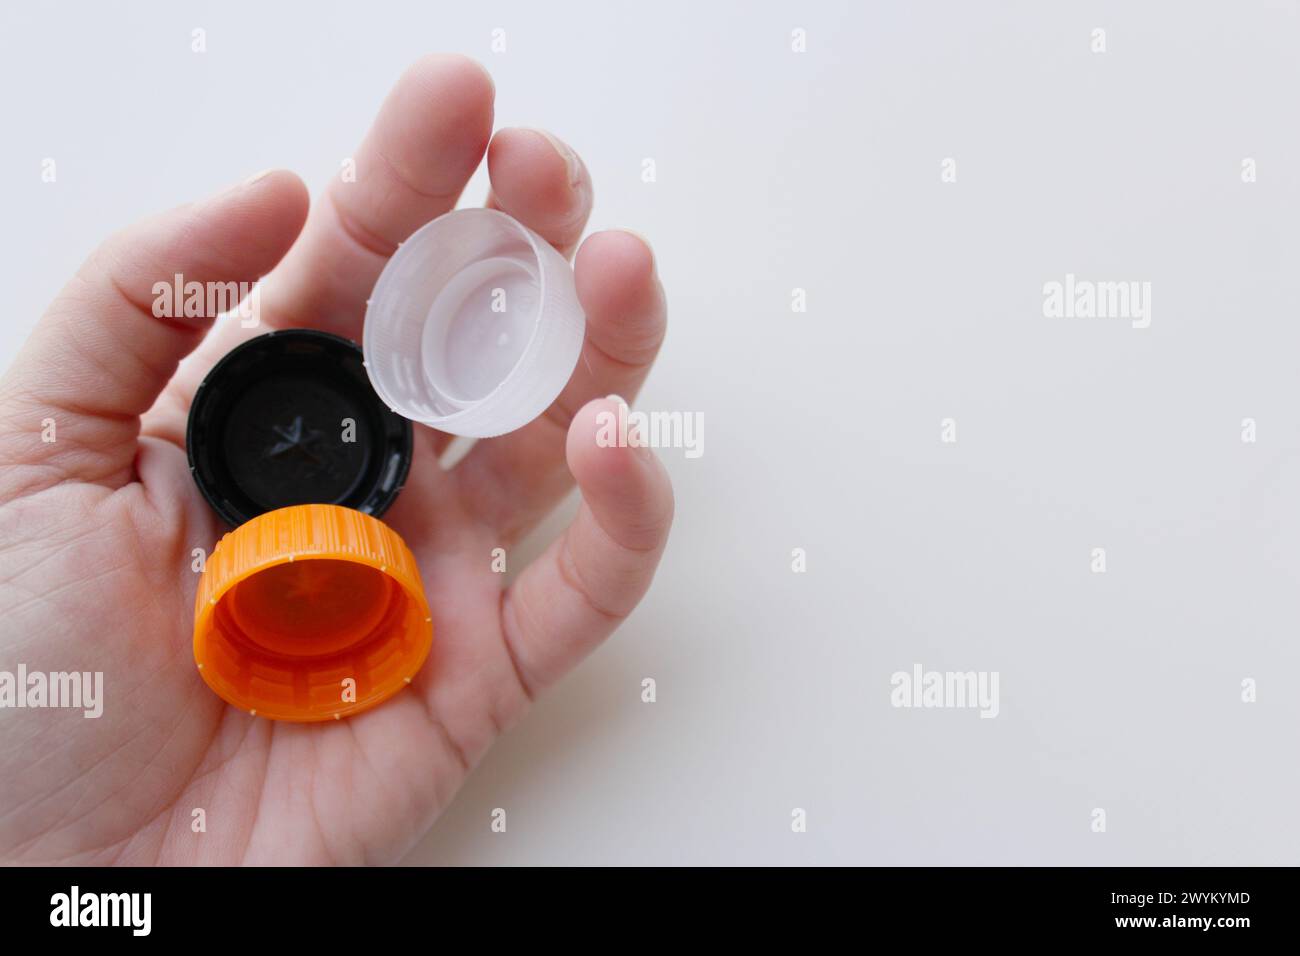 Woman's hand holding three plastic lids on white background, space for copy. Sustainability, recycling concept for June 5th World Environment Day Stock Photo